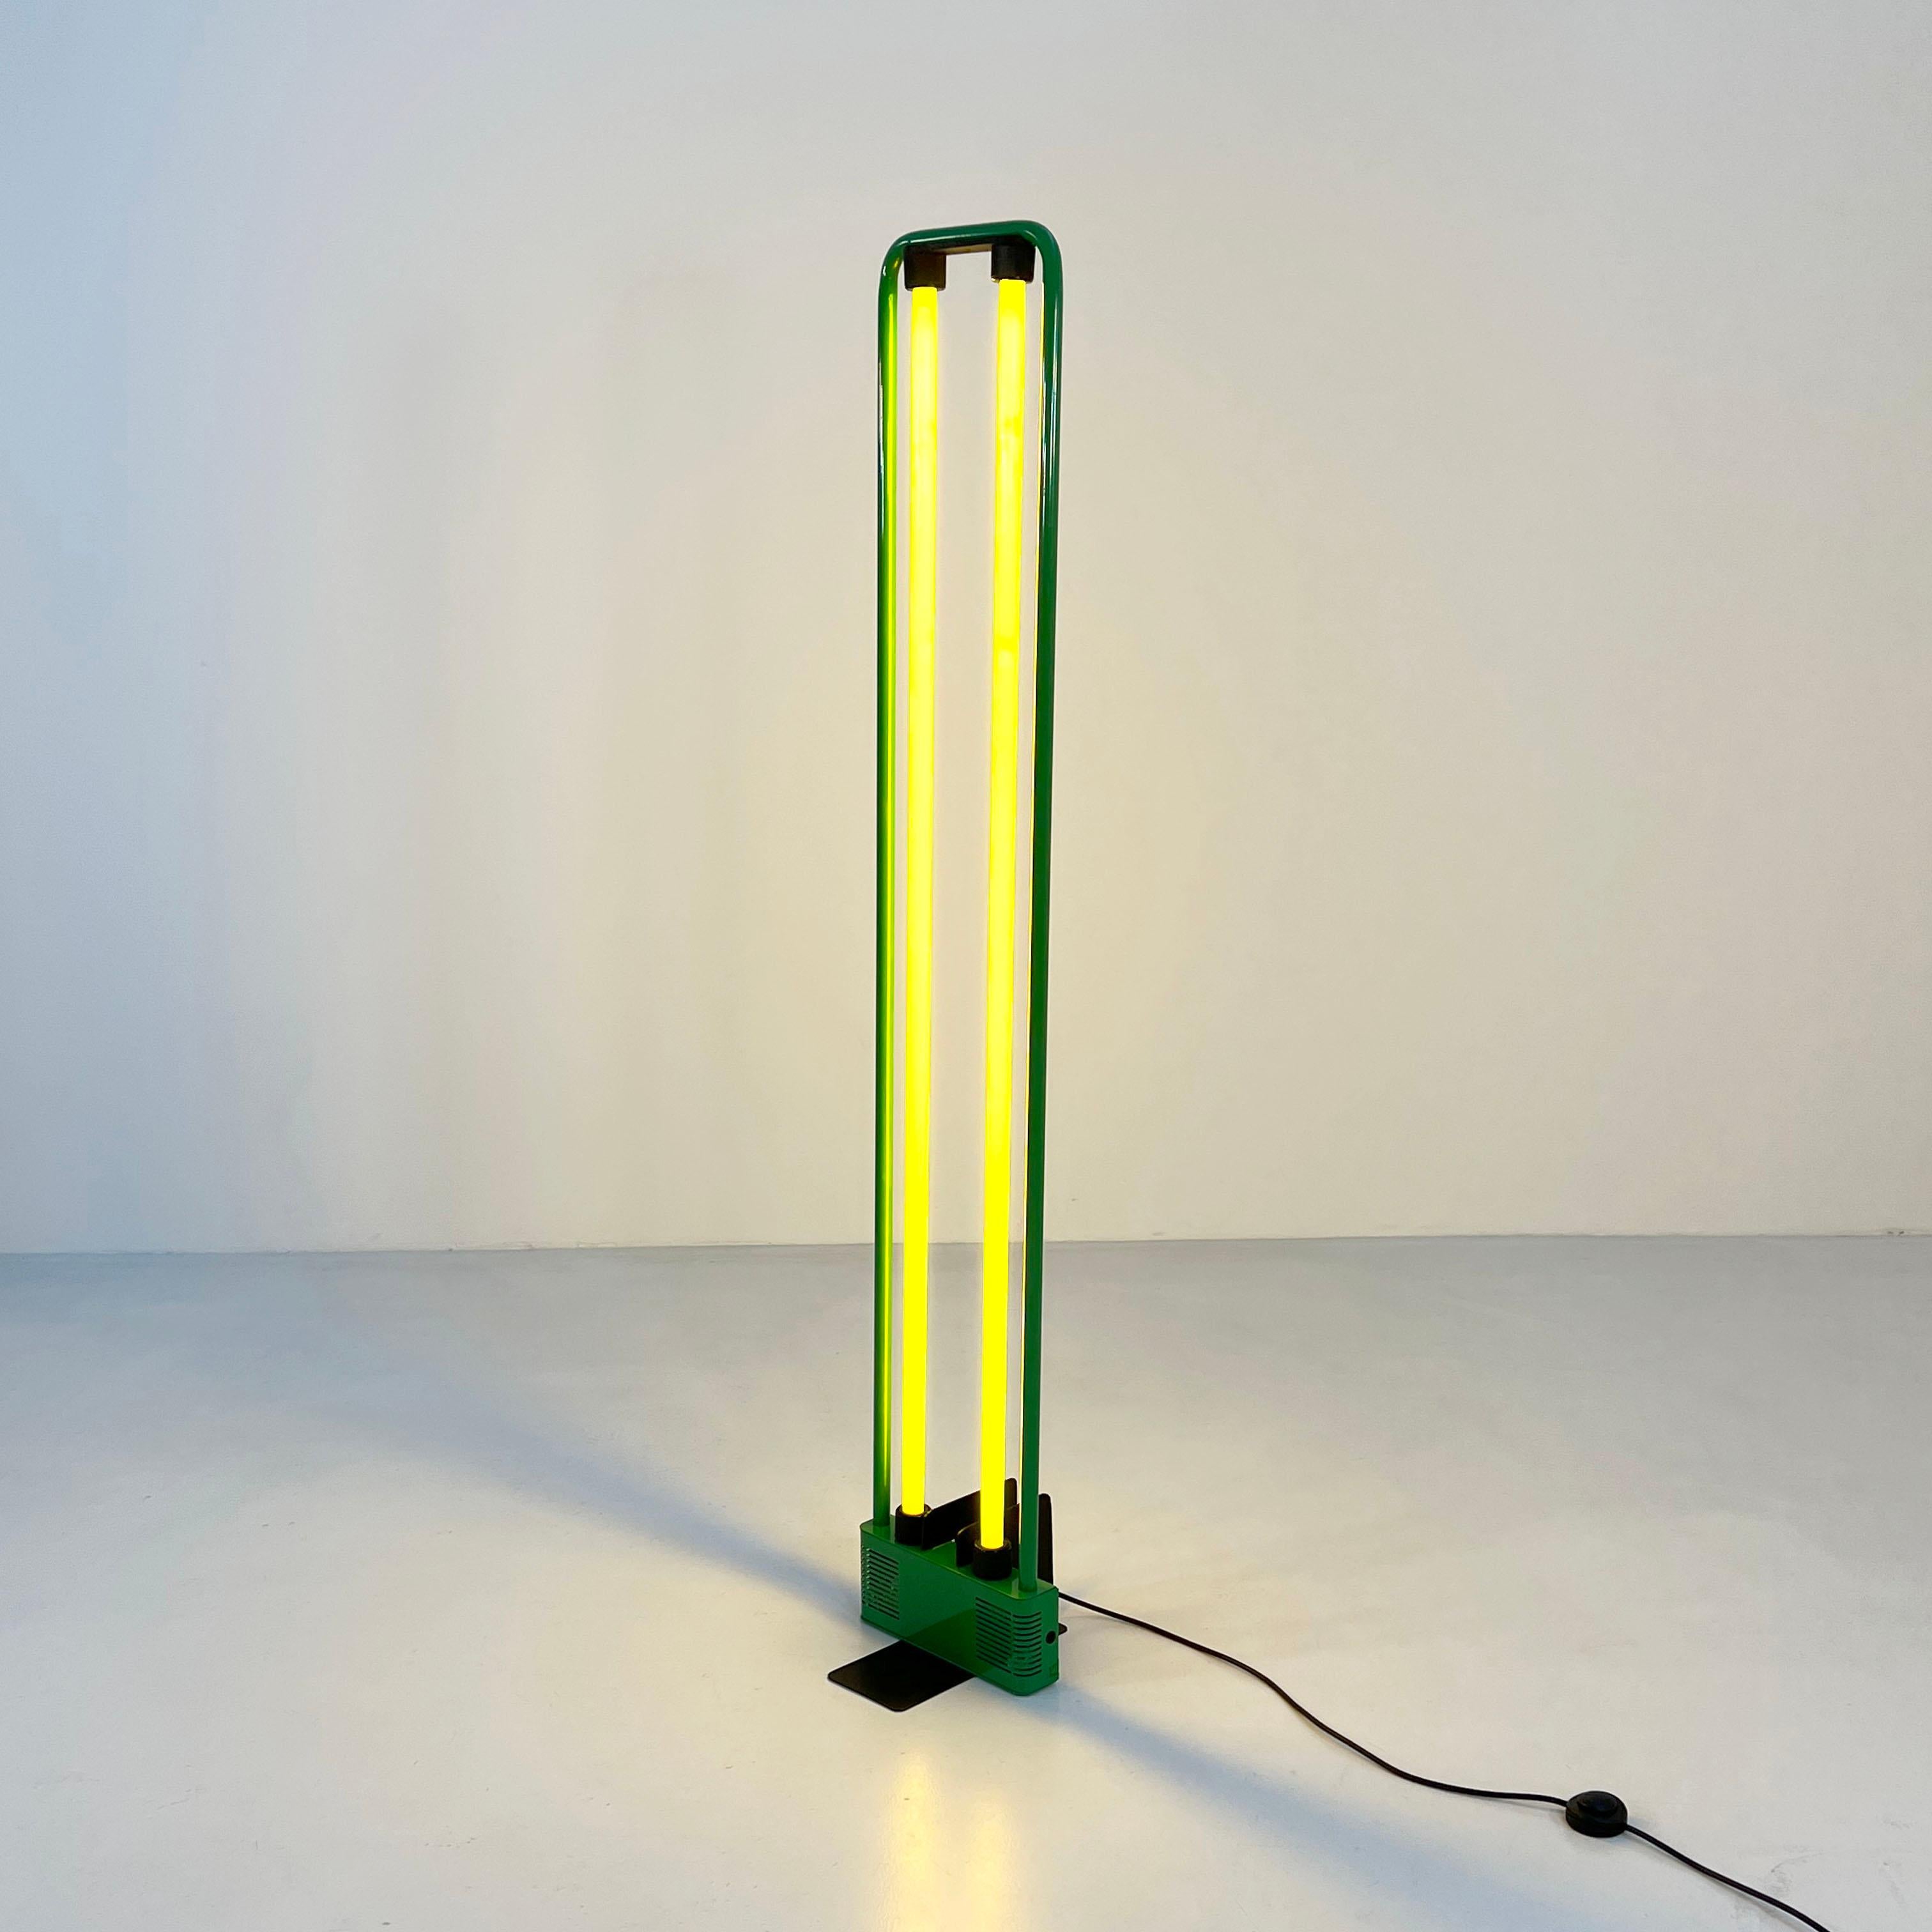 Designer - Gian N. Gigante
Producer - Zerbetto
Model - Large Fluorescent Floor Lamp
Design Period - Eighties
Measurements - Width 31 cm x Depth 31 cm x Height 169 cm 
Materials - Metal 
Color - Green
Light wear consistent with age and use. 